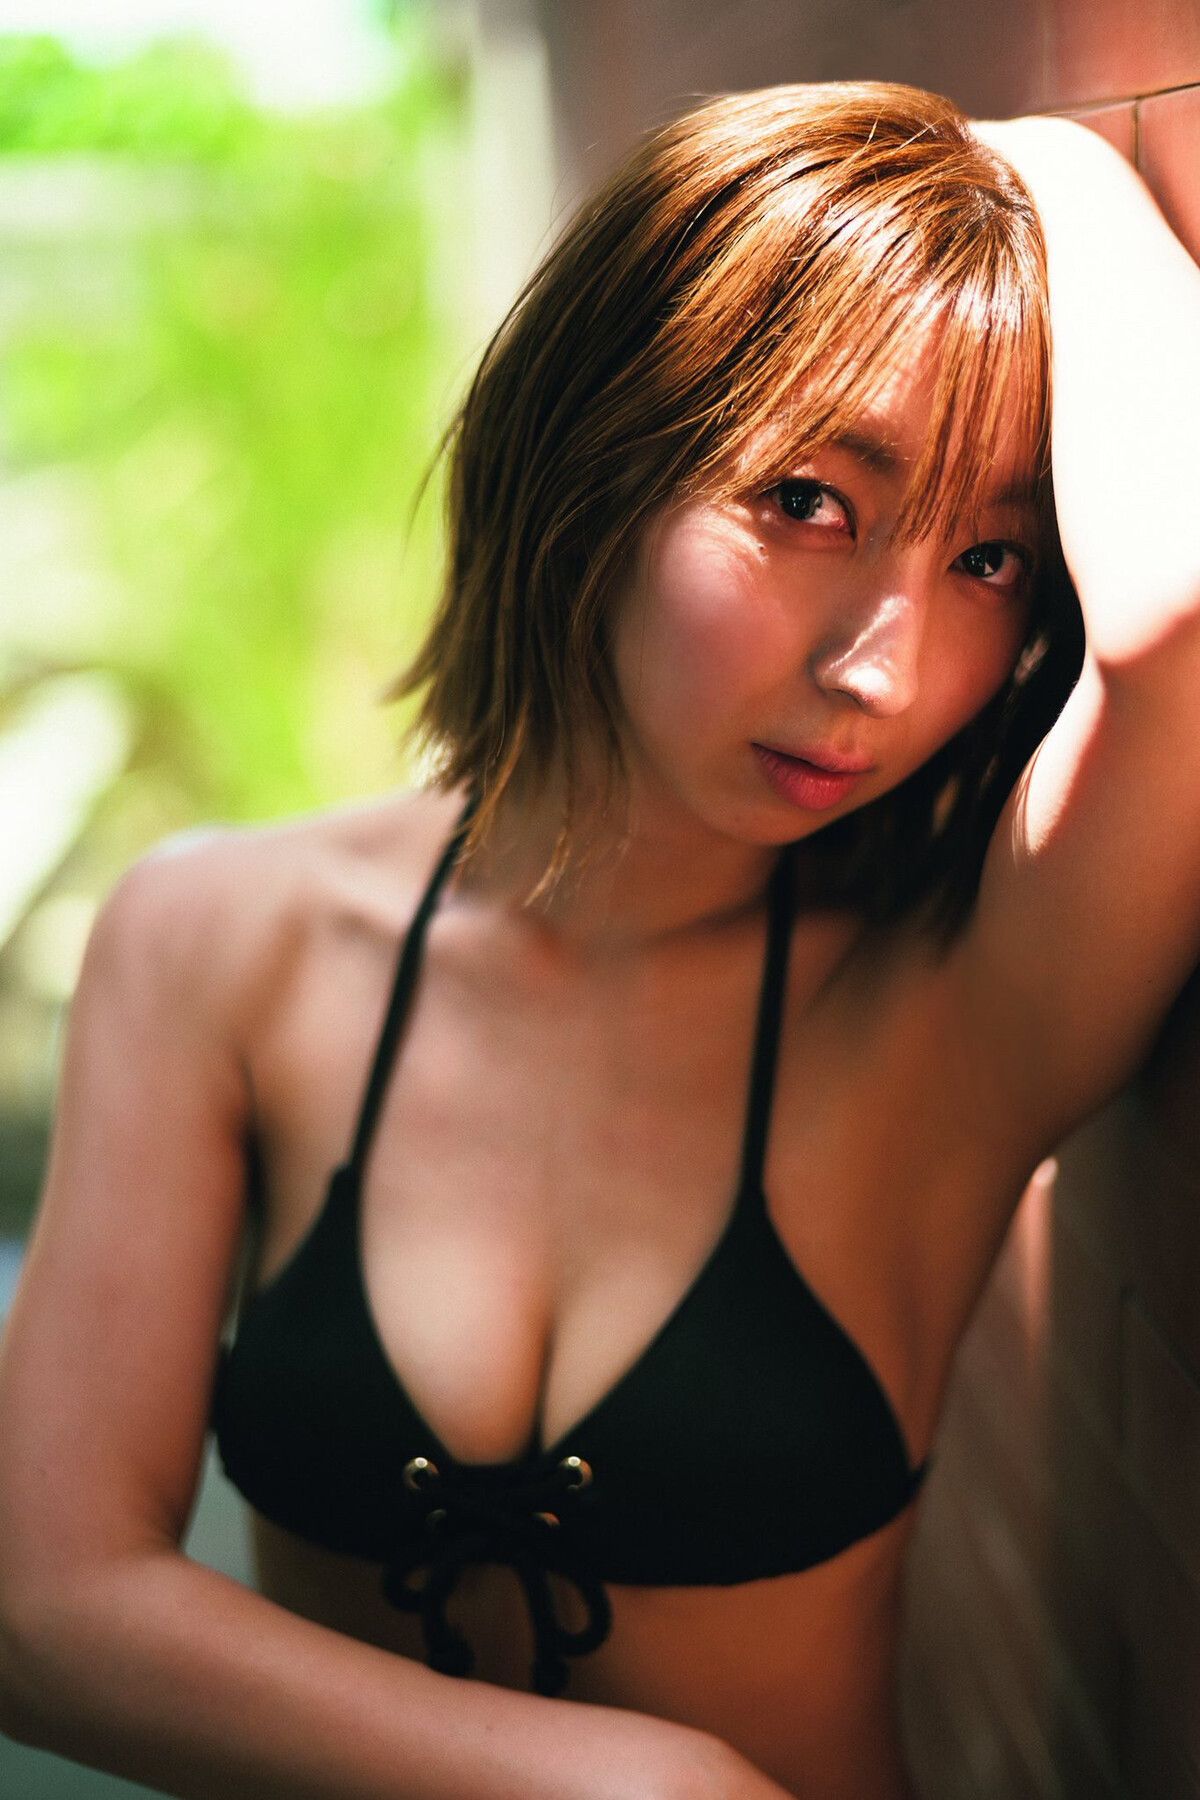 [Image] Love Live! Voice actor, Riho Iida, swimsuit kitta after a long time! ! 2